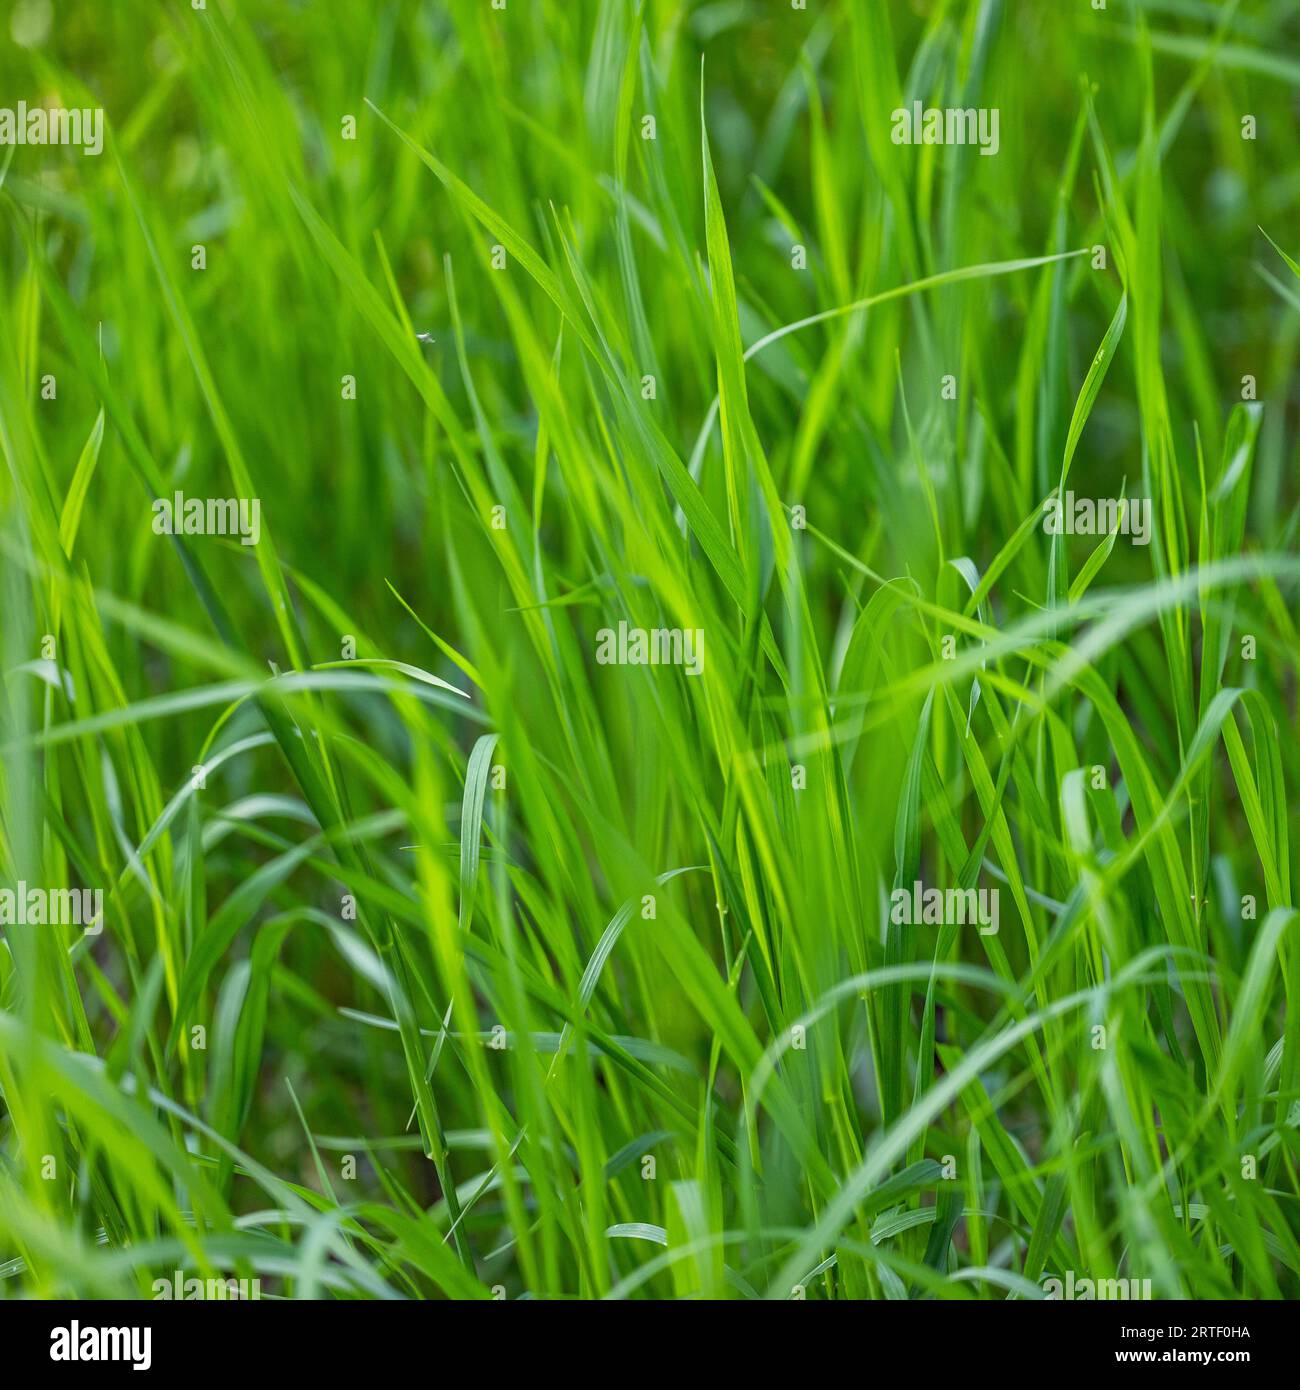 Full frame of green blades of grass Stock Photo